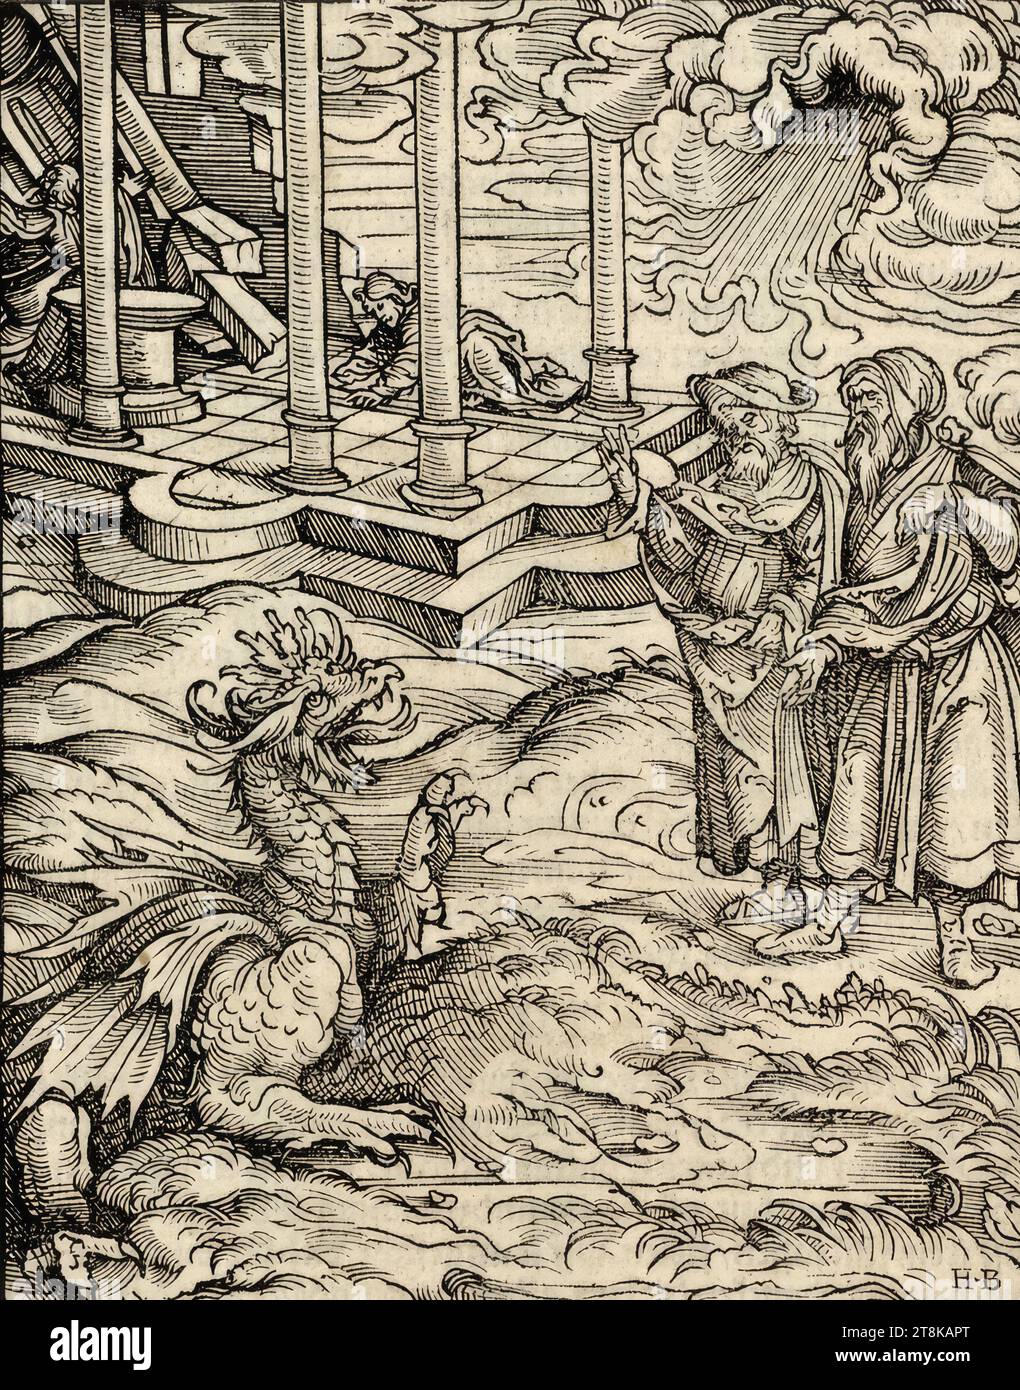 John measures the temple of God, illustrations of the apocalypse for Silvan Otmar's Augsburg edition of the Luther Bible, 1523, Hans Burgkmair the Elder. Ä., Augsburg 1473 - 1531 Augsburg, 1523, print, woodcut, plate: 16.4 x 13 cm Stock Photo